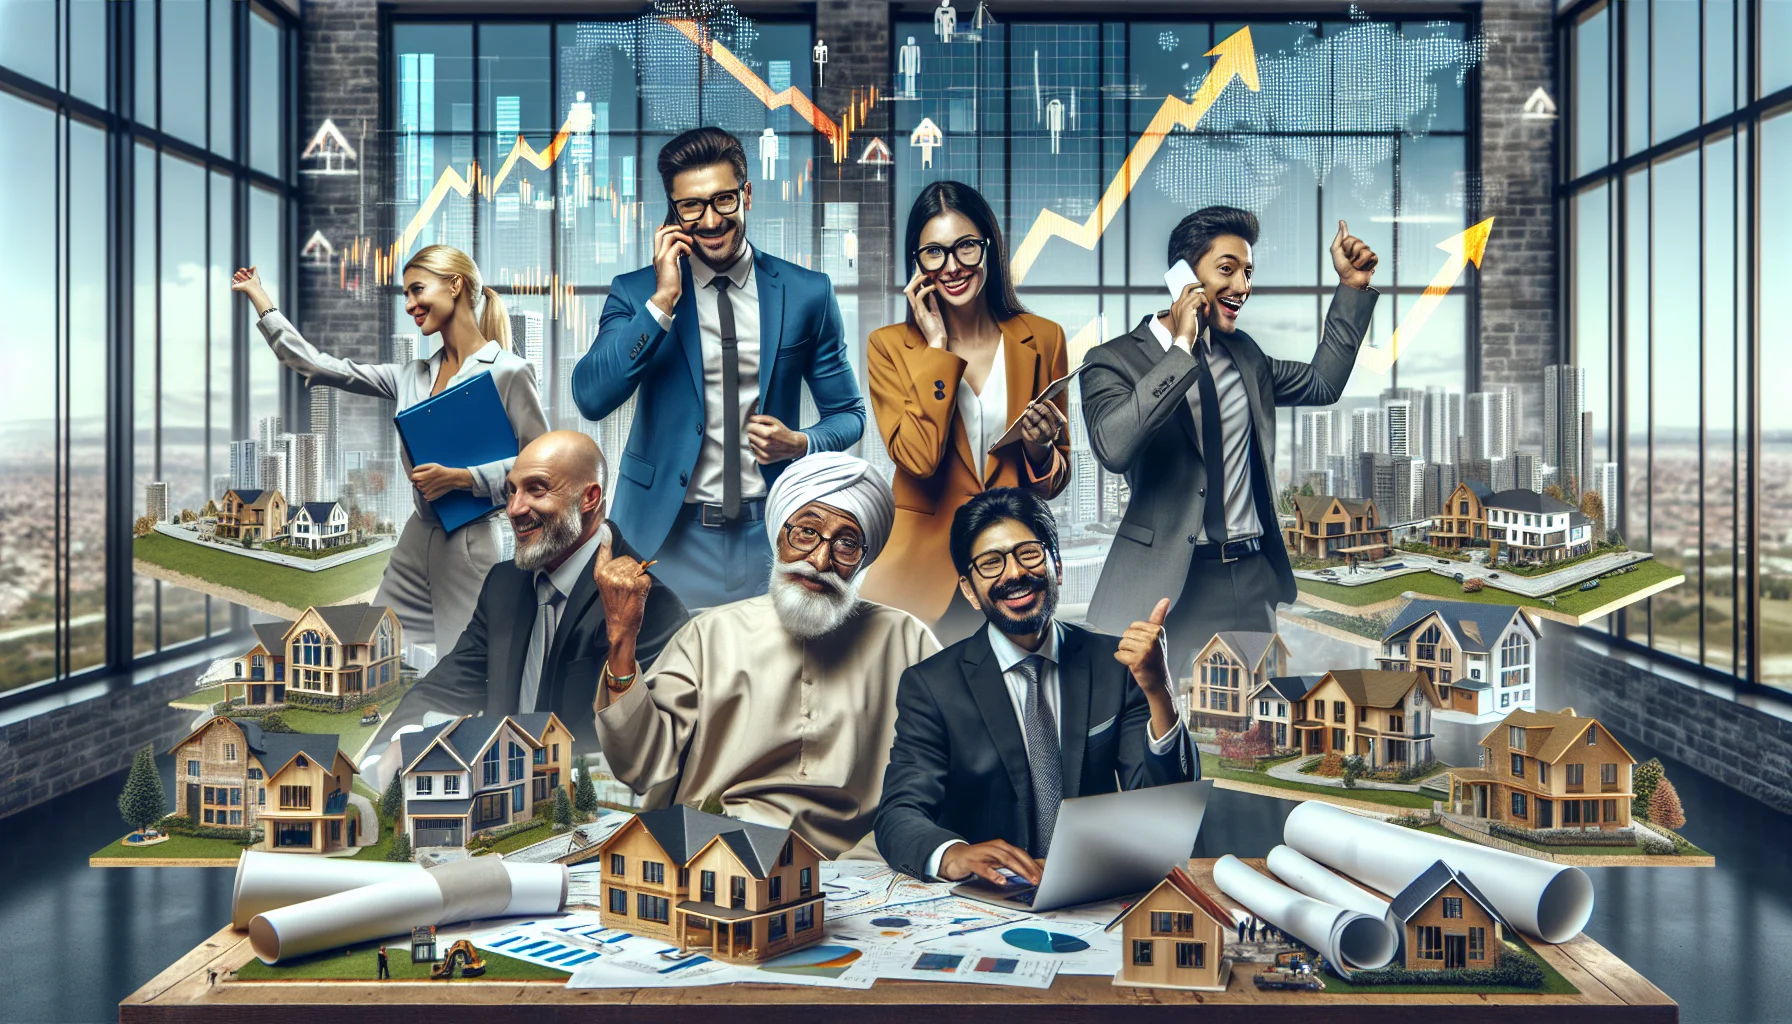 Imagine an idyllic and humorous yet plausible scenario in the realm of real estate investing. Picture a diverse team of successful real estate investors: a Caucasian woman with spectacles pouring over blueprints and market data, a younger Middle-Eastern male confidently handling a phone call with clients, a Hispanic man in a smart suit sealing a deal, and an elderly South Asian woman celebrating previous successful transactions. They are in an office filled with models of properties and real-estate banners. Close by are images of perfect houses and rising stock market graphs. This image radiates the essence of success, collaboration, and impeccable service in real estate investment.